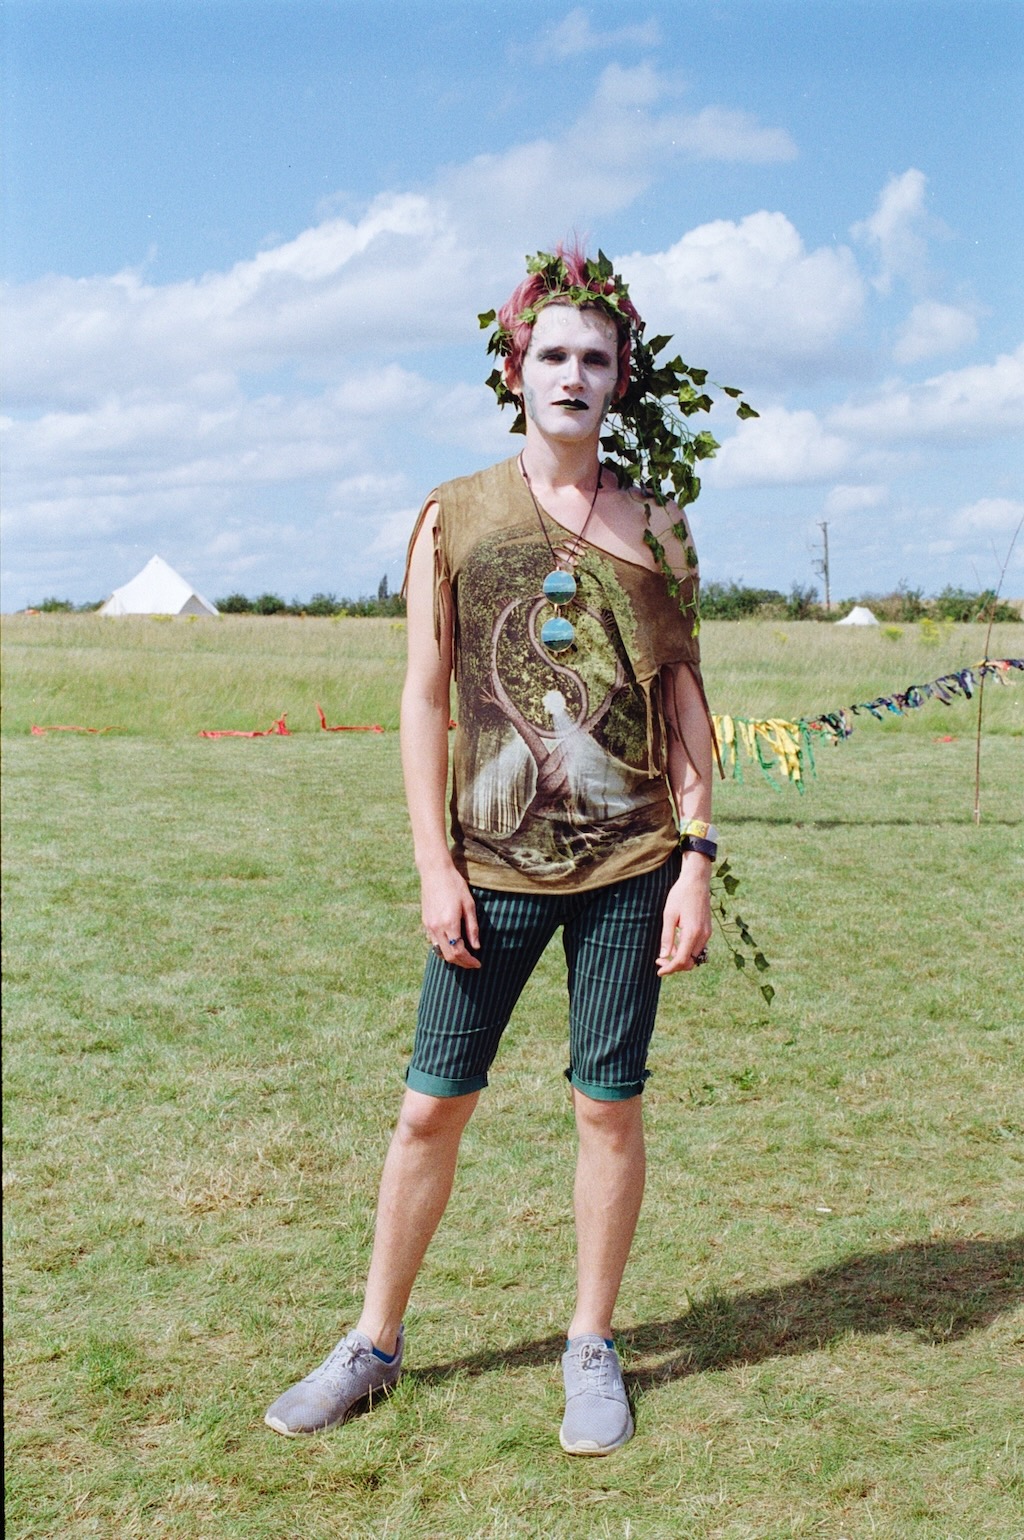 Person standing in a field with a flower crown